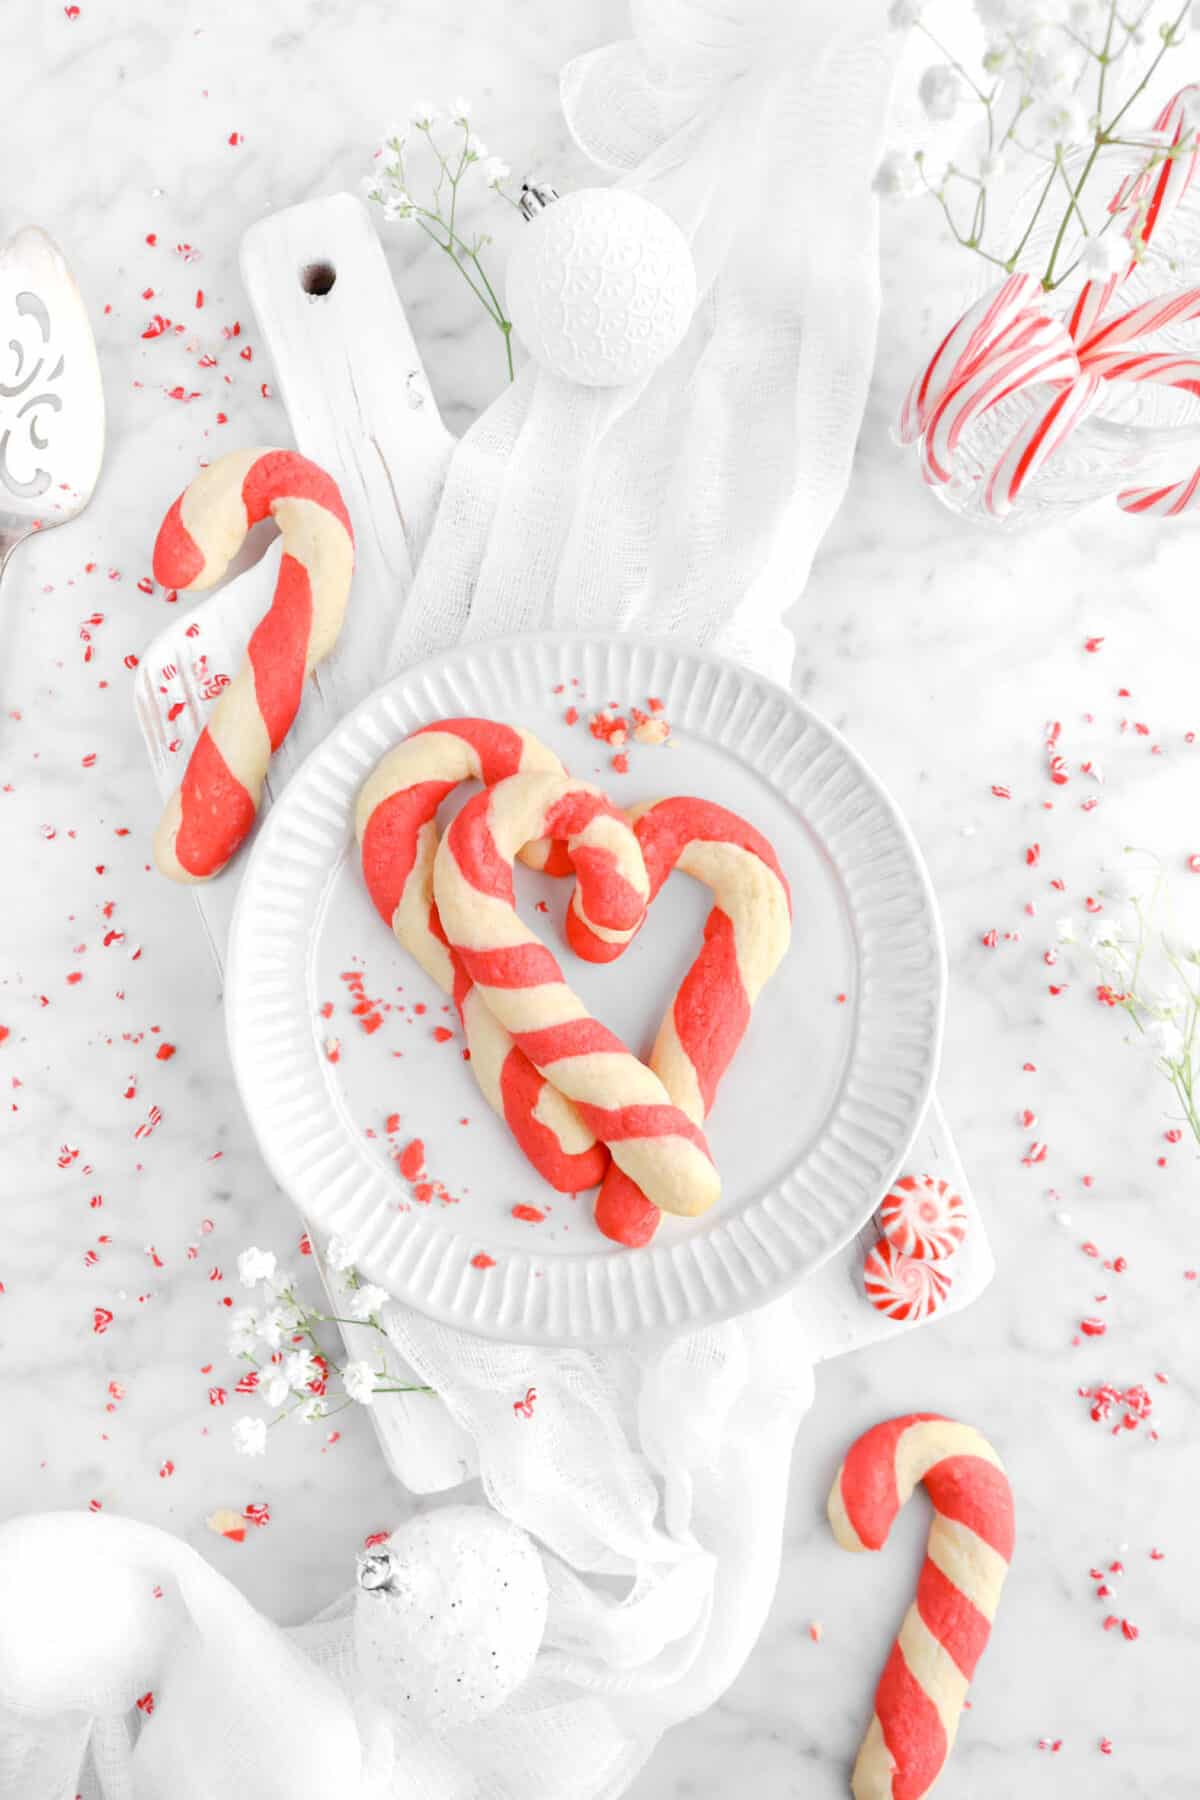 three candy cane cookies on white palte on serving board with candy canes, peppermint candies around, with flowers